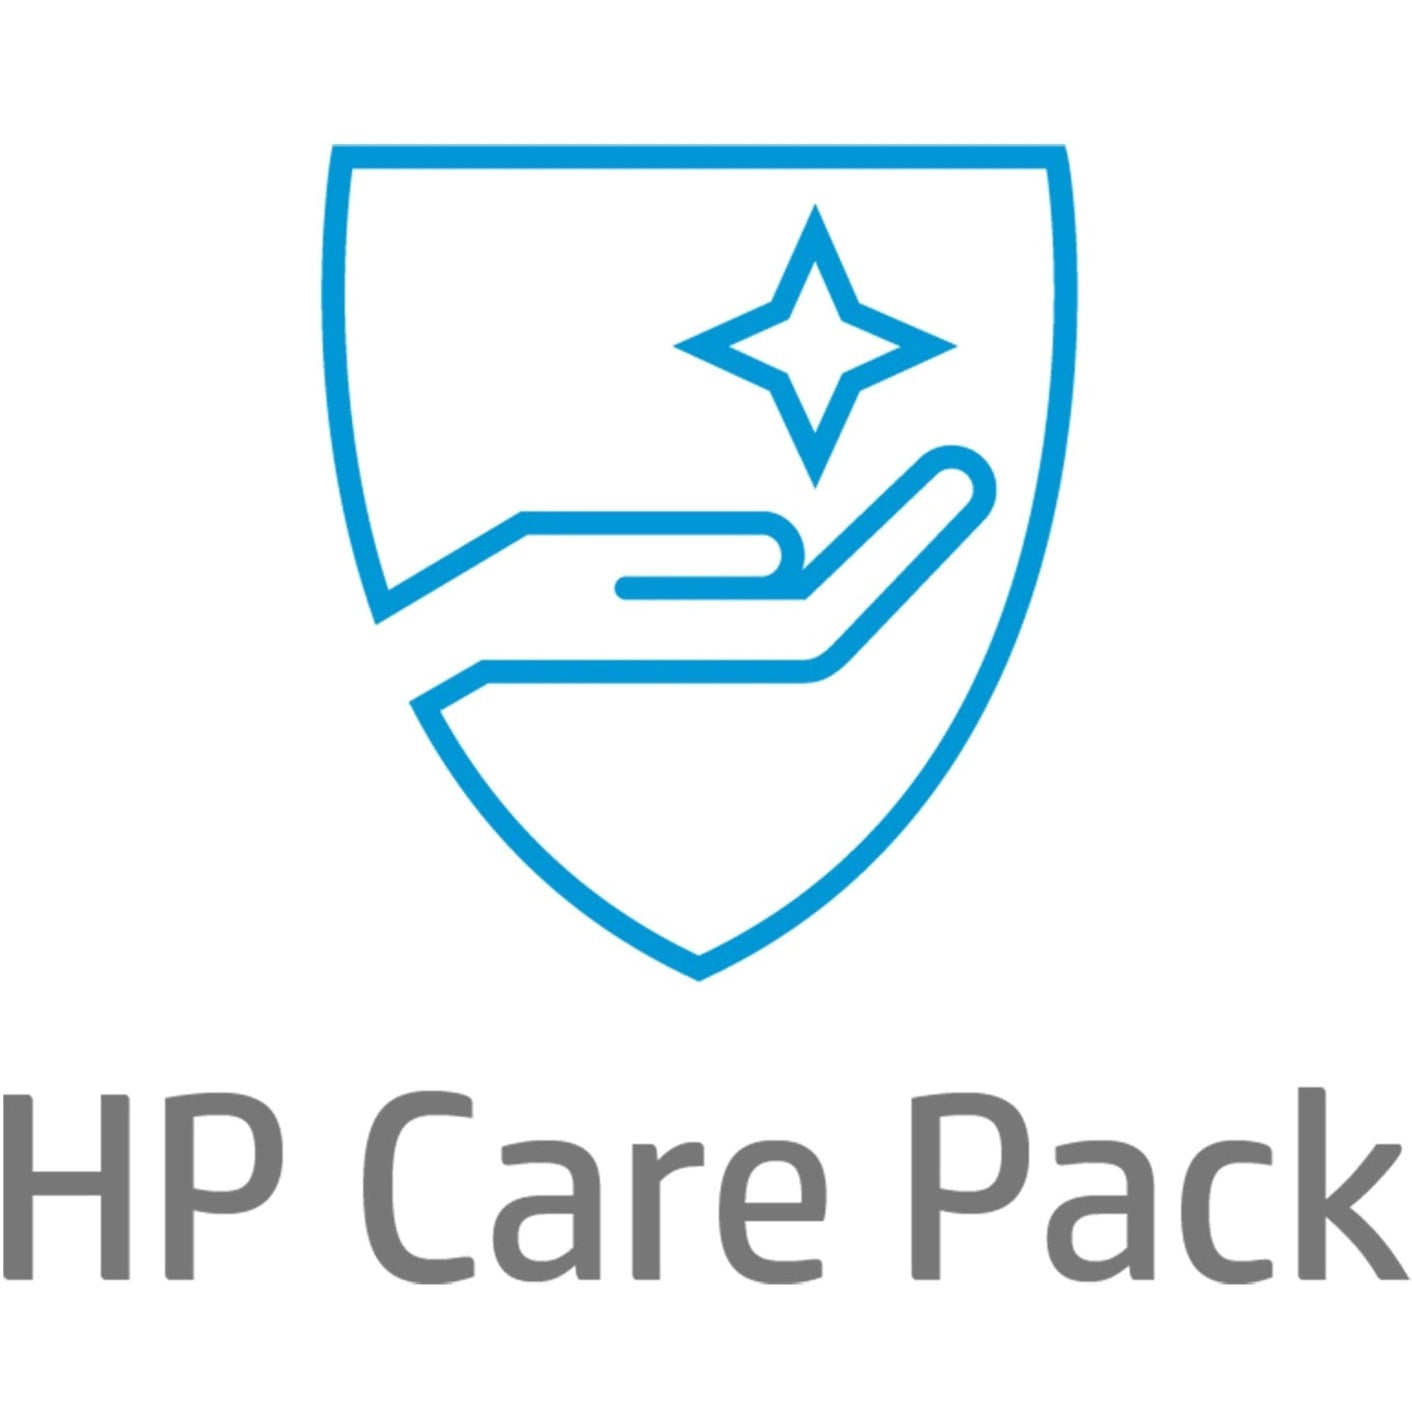 HP Care Pack Hardware Support - 2 Year - Service (UJ216E)